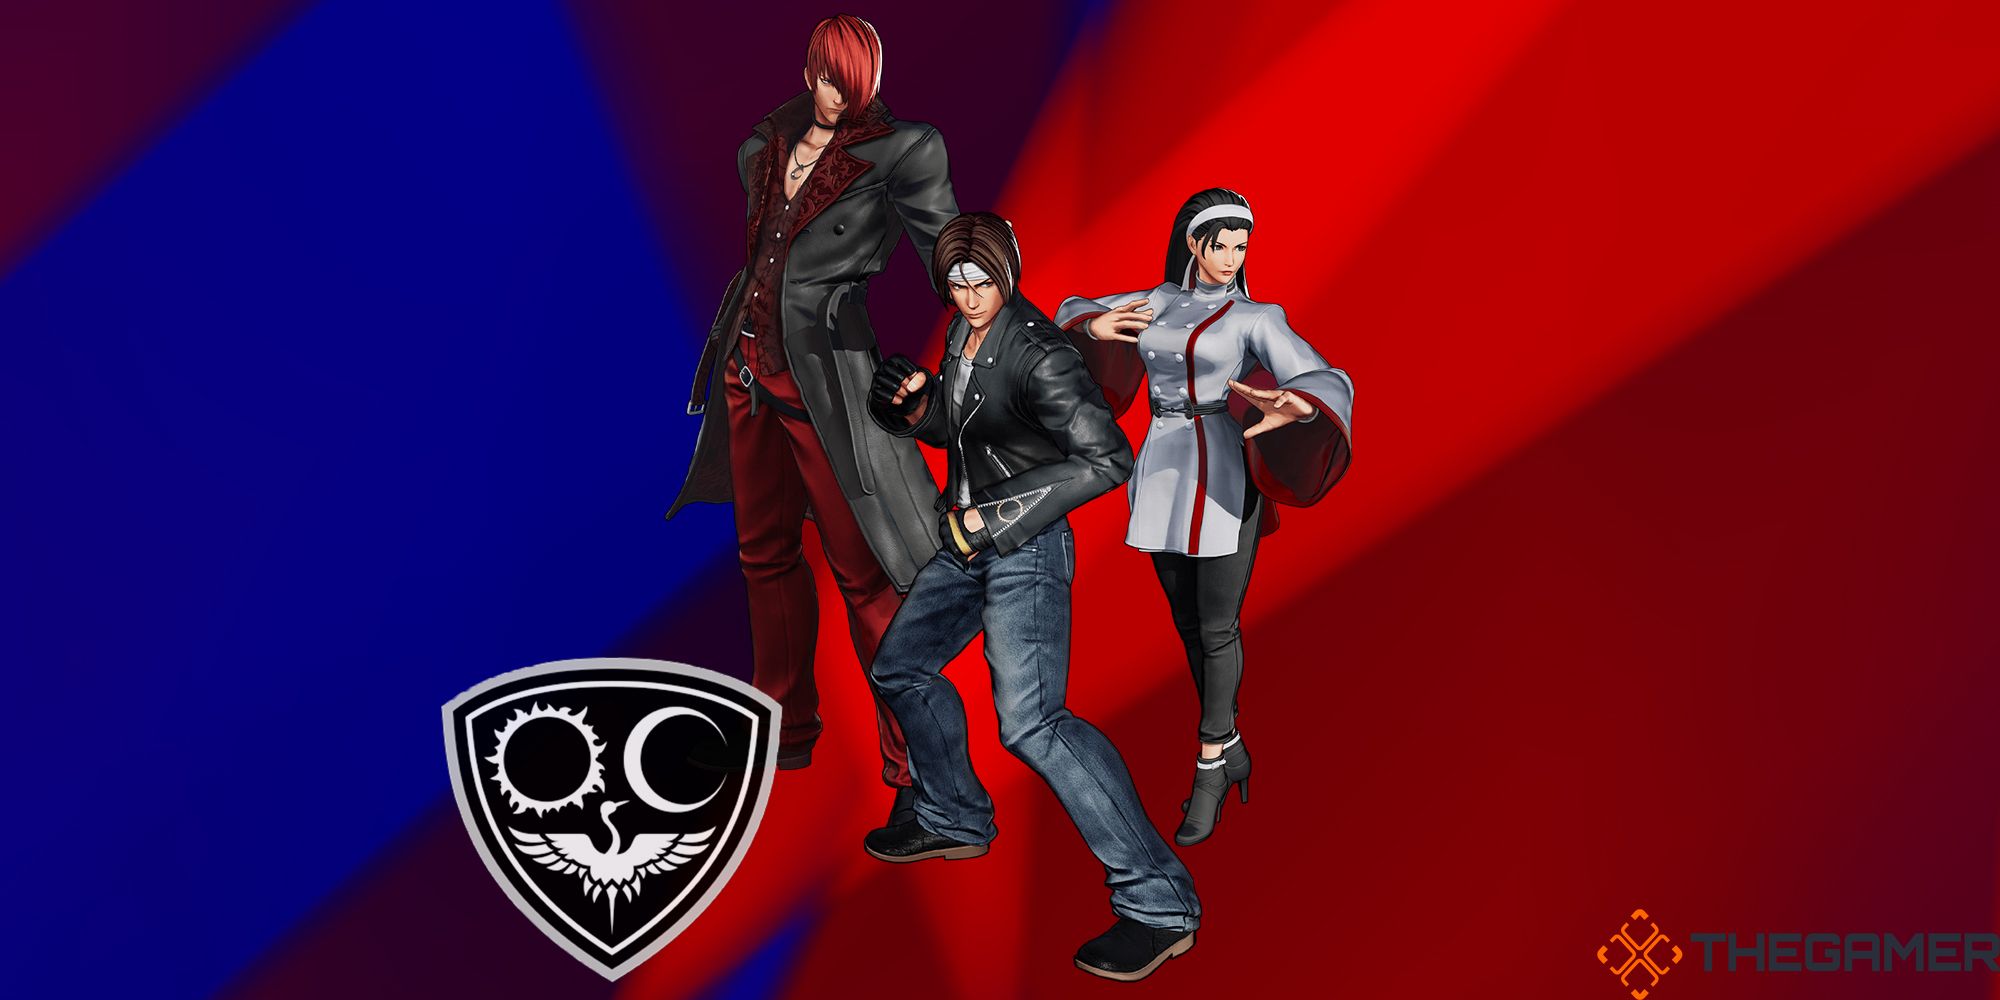 A custom image featuring, Iori Yagami, Kyo Kusanagi, and Chizuru Kagura with the Team Sacred Treasure crest against a red and blue background. The King Of Fighters 15.